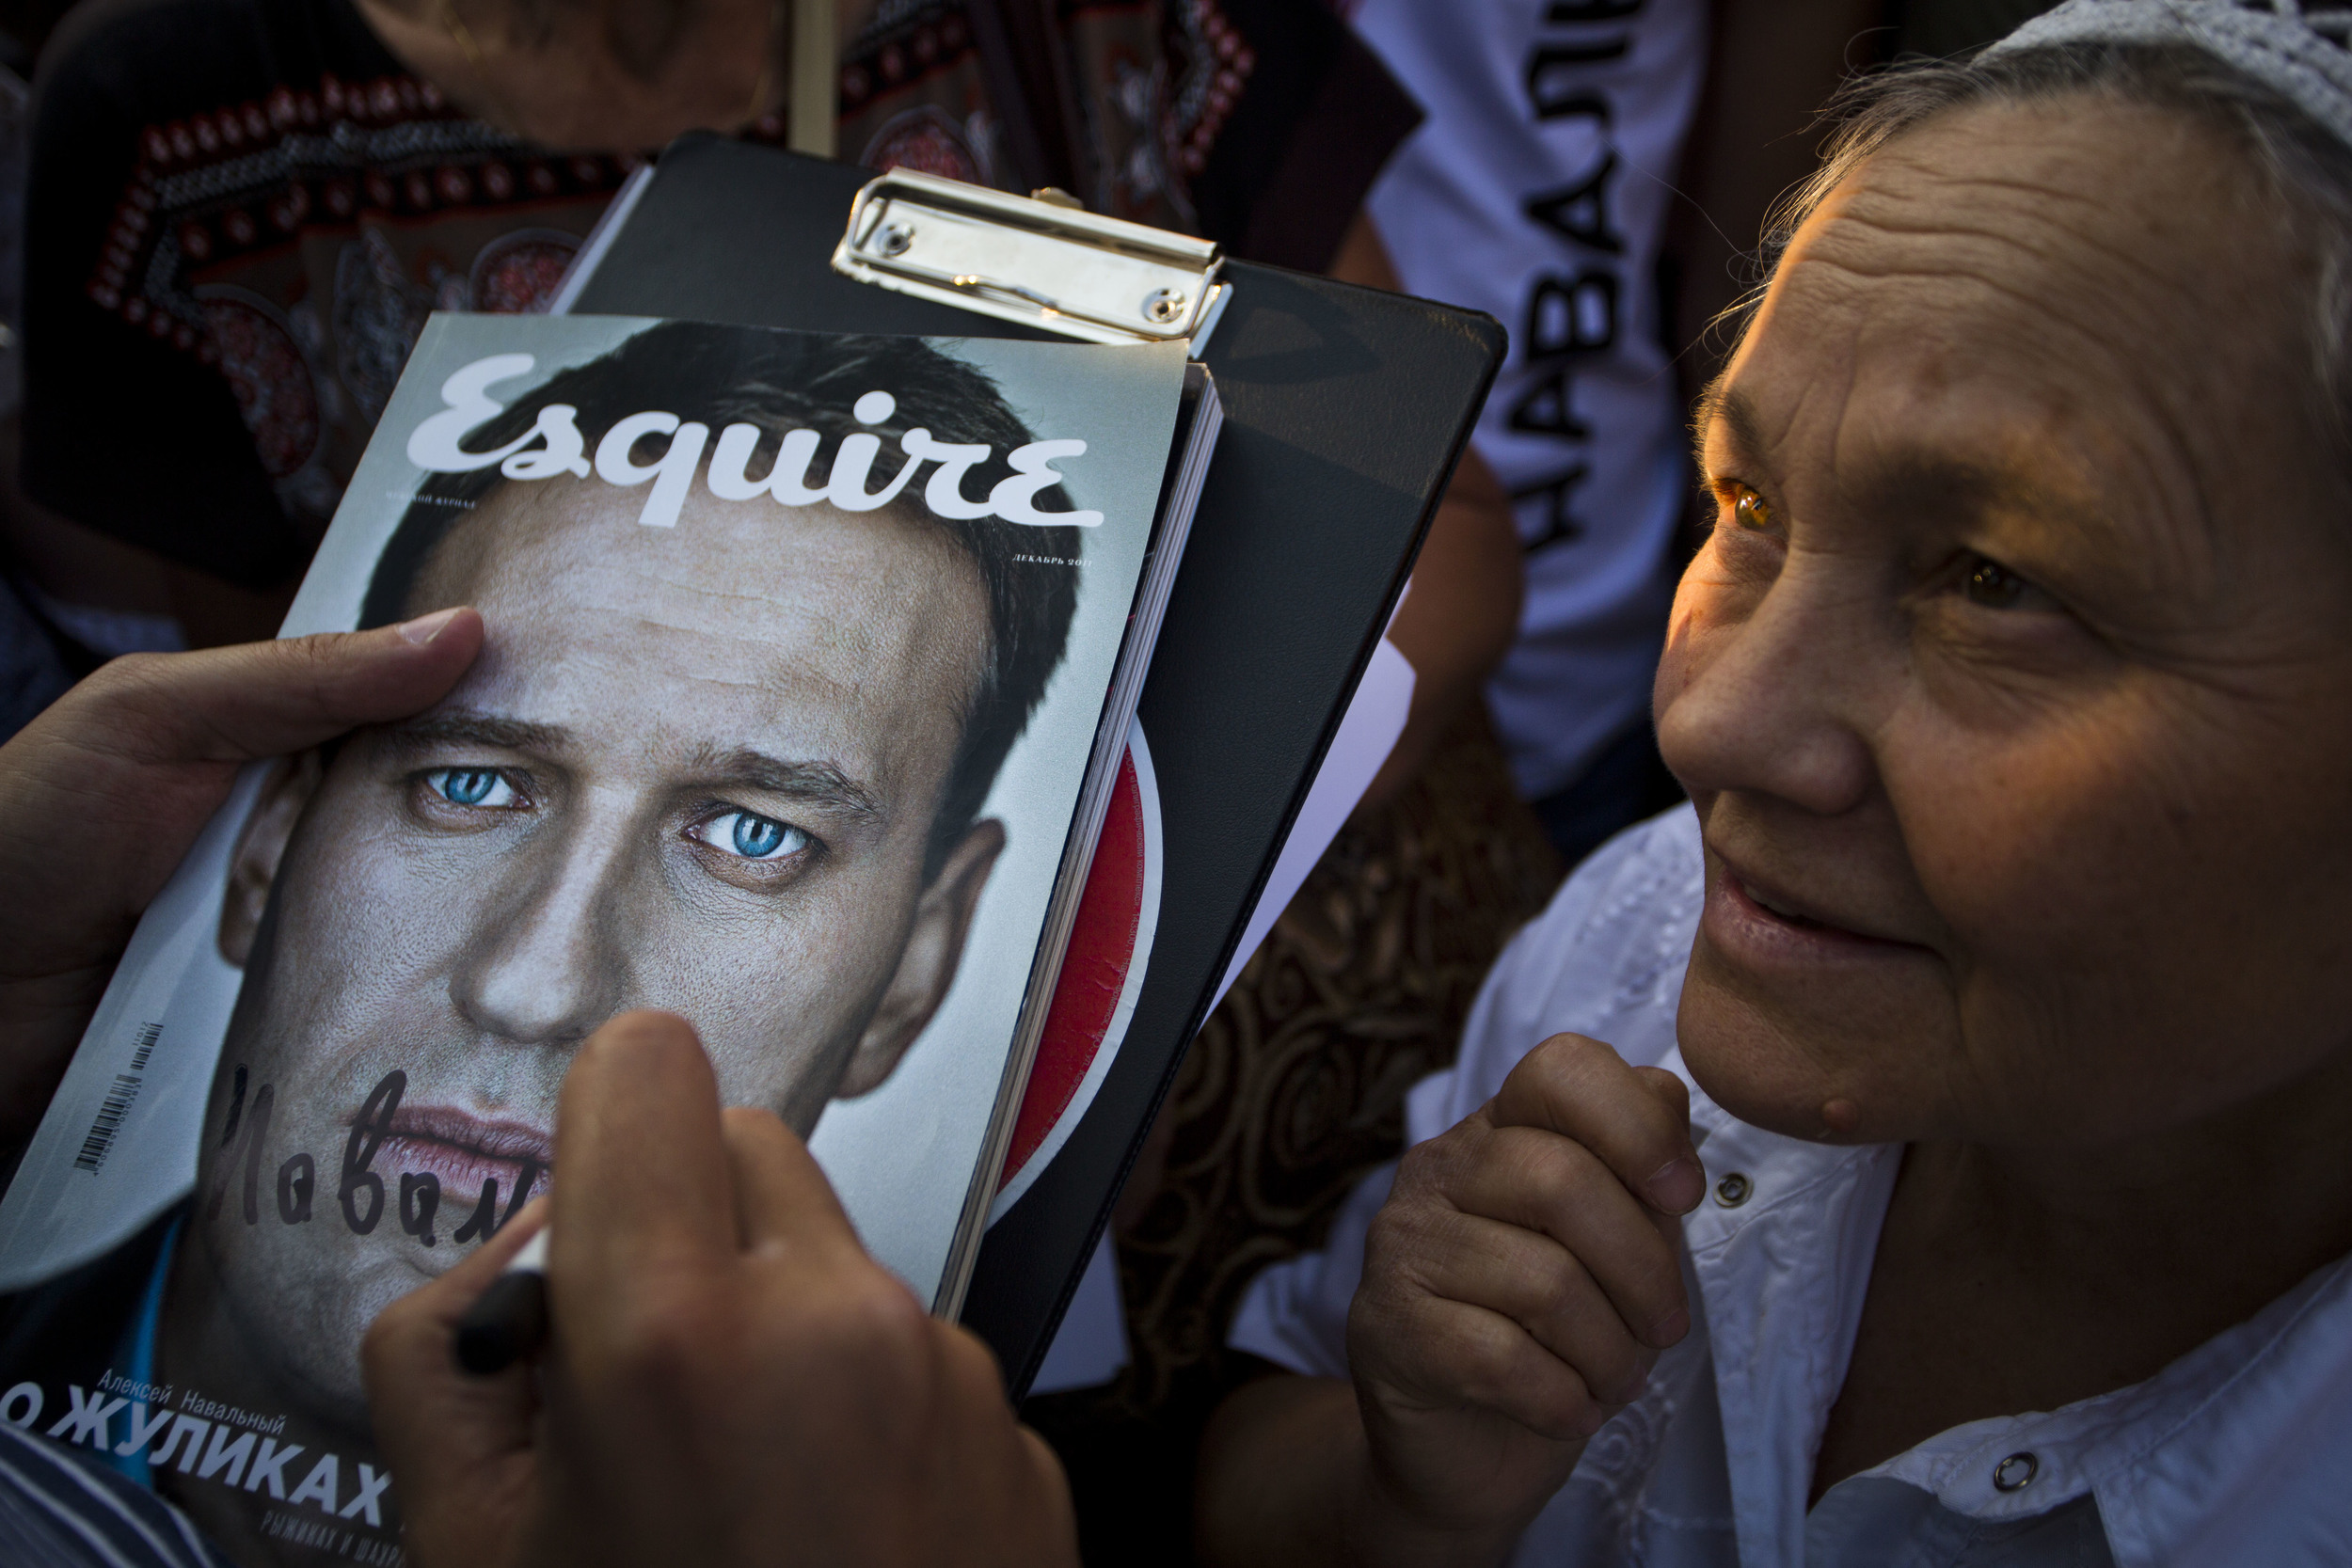 A woman asks Alexey Navalny for an autograph during his campaign for Moscow mayorship. August 21, 2013